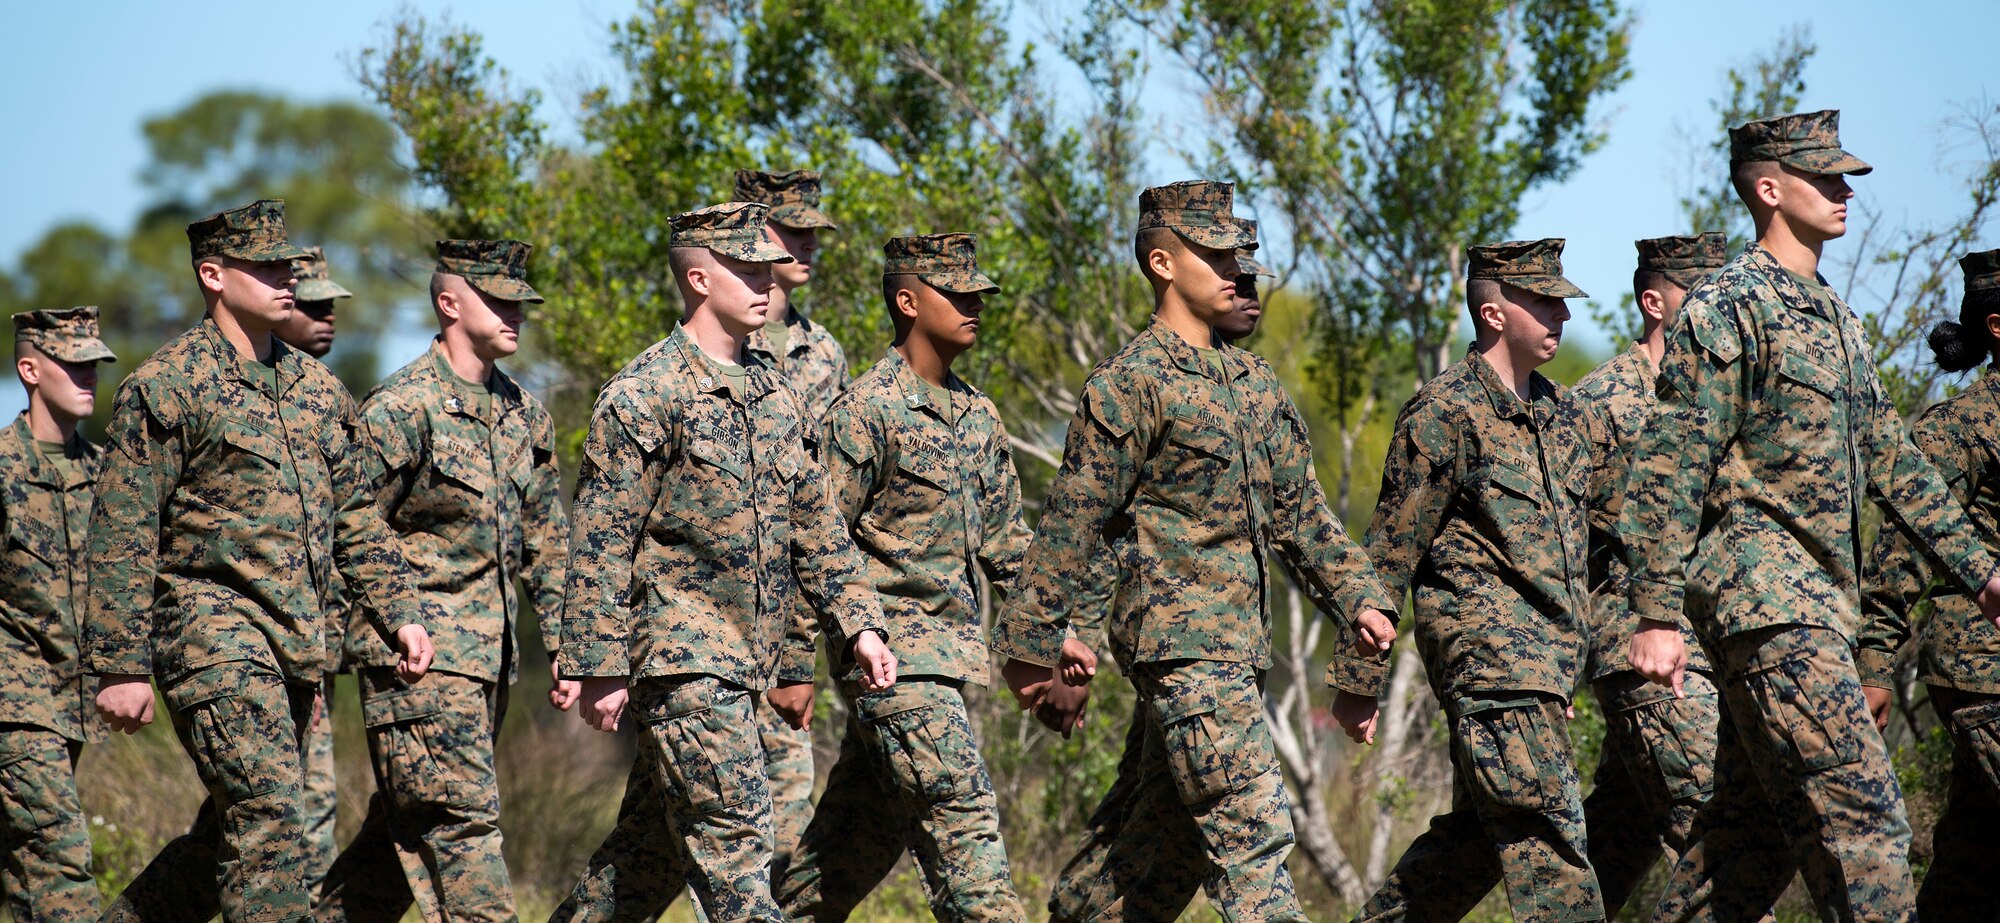 U.S. Marines march during a U.S. Marine Corps Forces Central Command noncommissioned officer field exercise at MacDill Air Force Base, Fla., March 14-15, 2018. The exercise provided an environment for Marines to focus on the basic skills they learned in recruit training.